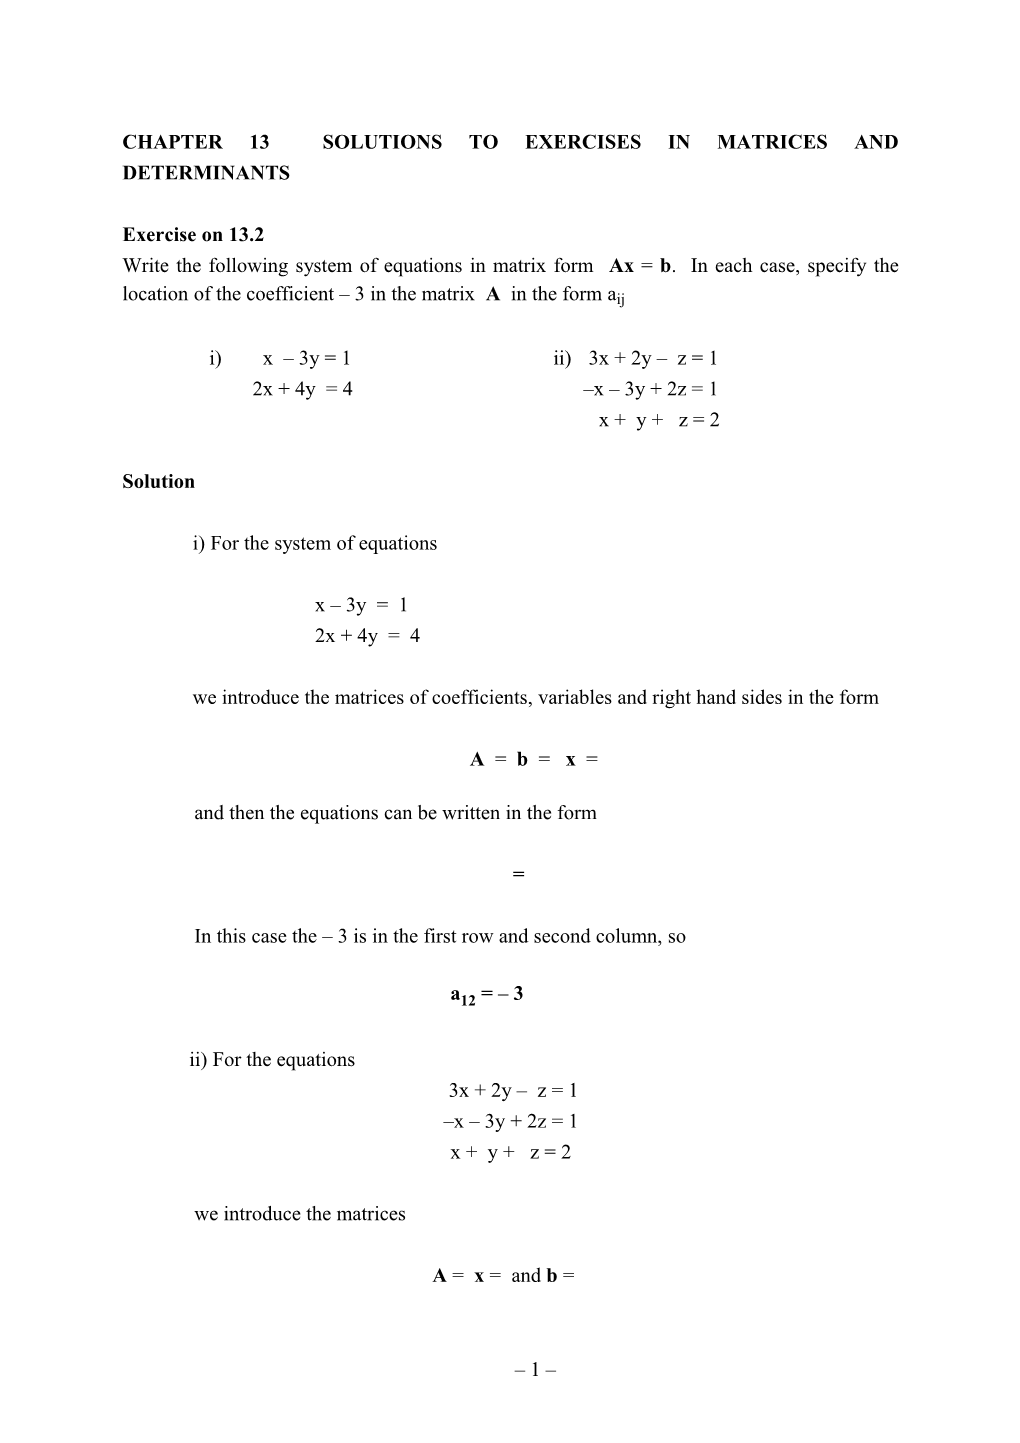 Chapter 13 Solutions to Exercises in Matrices and Determinants